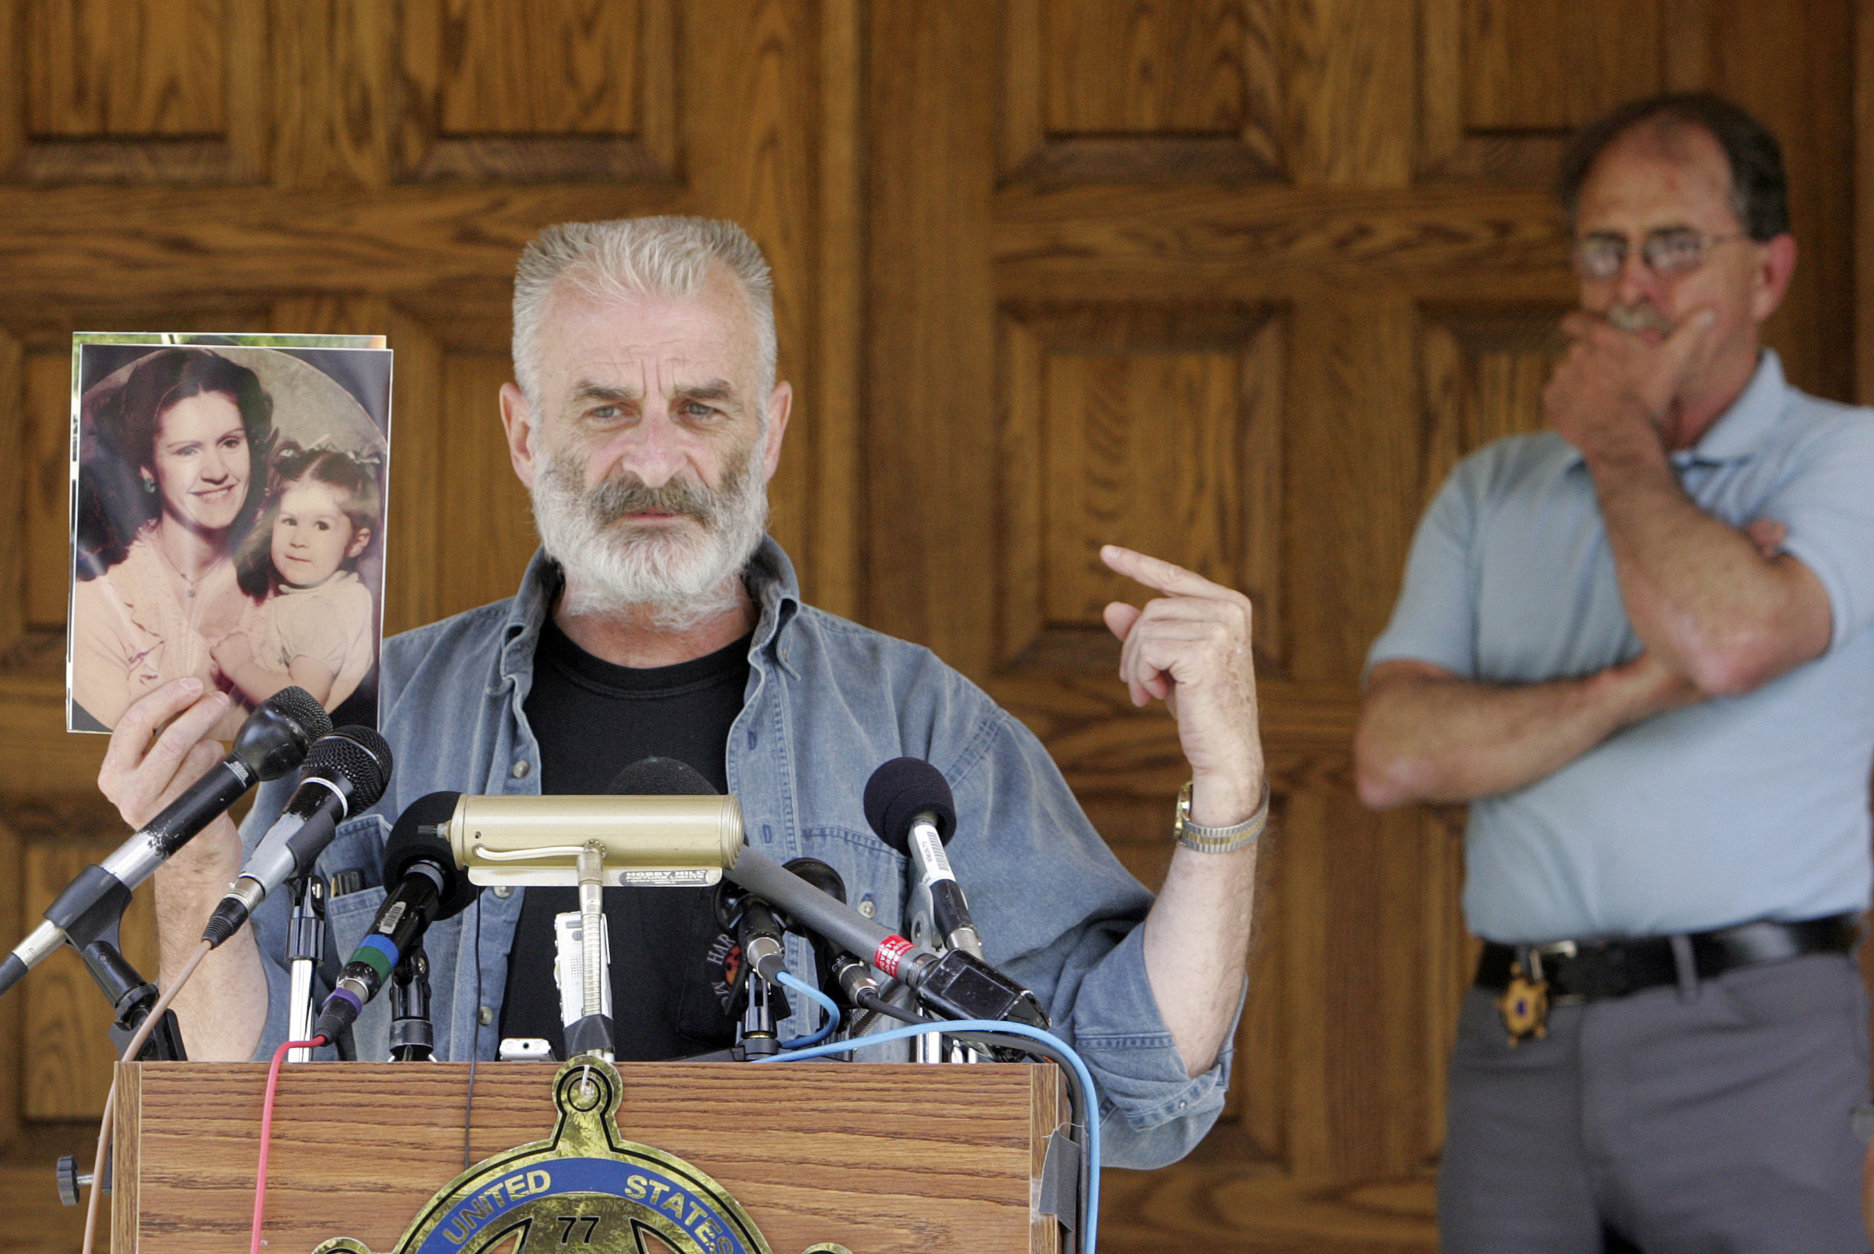 Ruby Ridge survivor Randy Weaver holds a photo of his wife Vicki, and 10-month-old daughter Elishiba as Ed Brown, back right, listens in Plainfield, N.H., Monday, June 18, 2007. Weaver's wife and child were killed in 1992 during a raid by federal agents. Ed and Elaine Brown have been convicted of tax evasion and have been holed up in their home refusing to pay back taxes. (AP Photo/Jim Cole)